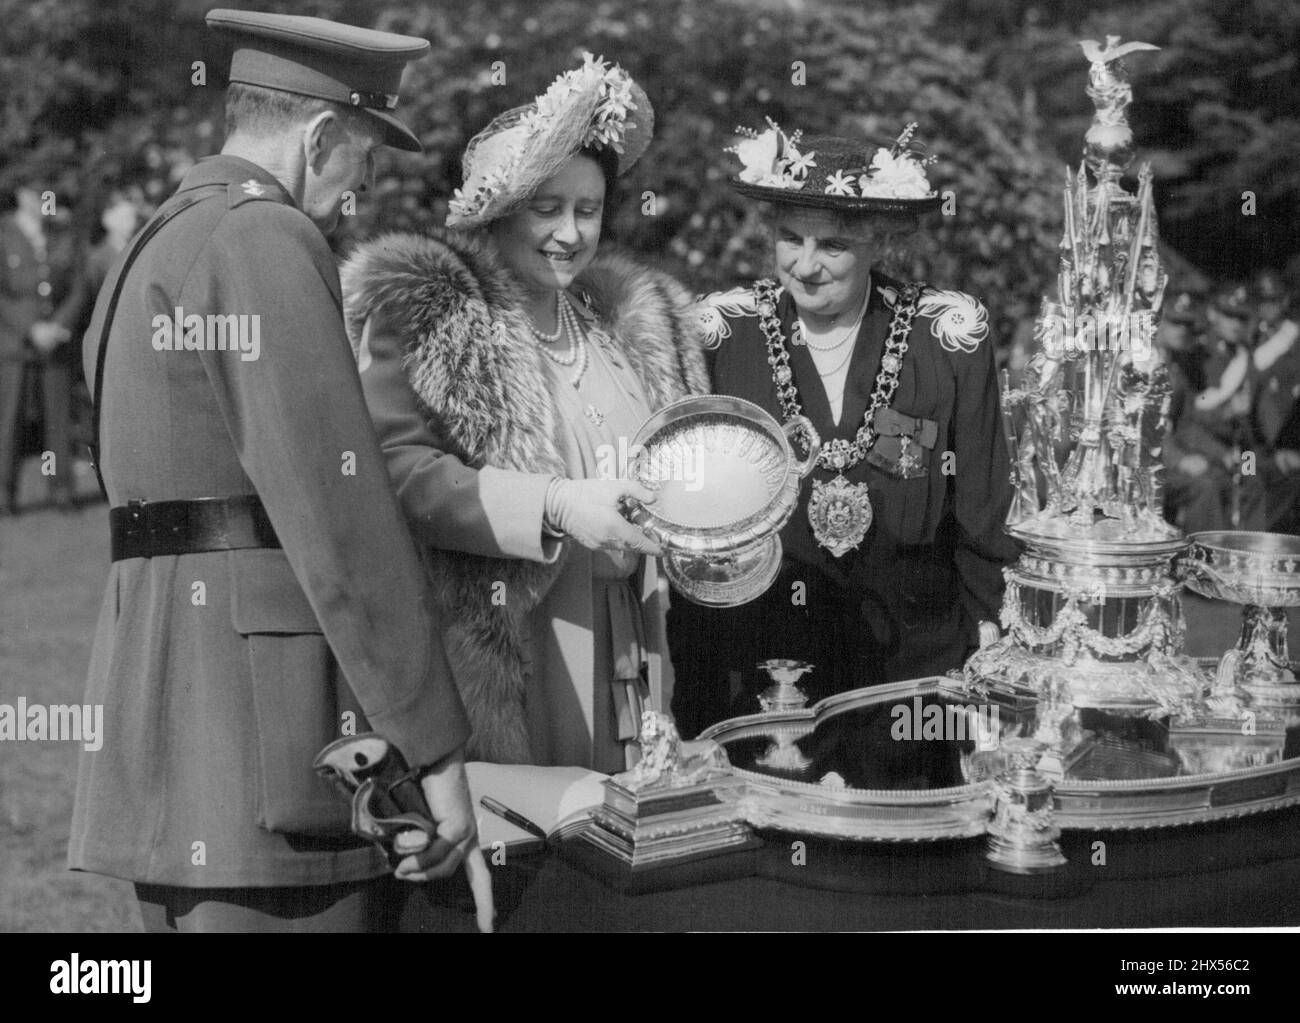 Queen Inspects Manchester Regiment -- The famous old silver centre-piece, made from melted-down battle trophies, which has been in the Regiment's possession since1881. Her Majesty, on behalf of the Regiment, handed it over to the City of Manchester through the Lord Mayor, Alderman Mrs. Mary. L. Kingsmill Jones.H.M. The Queen paid her visit as Colonel-in-Chief of the Manchester Regiment on Tuesday, when she inspected 500 officer and men and 600 old comrades at the unit's depot at Hunham Park, near Manchester. The Visit was the initial stage of Her Majesty's two-day tour of Cheshire and Lancashi Stock Photo